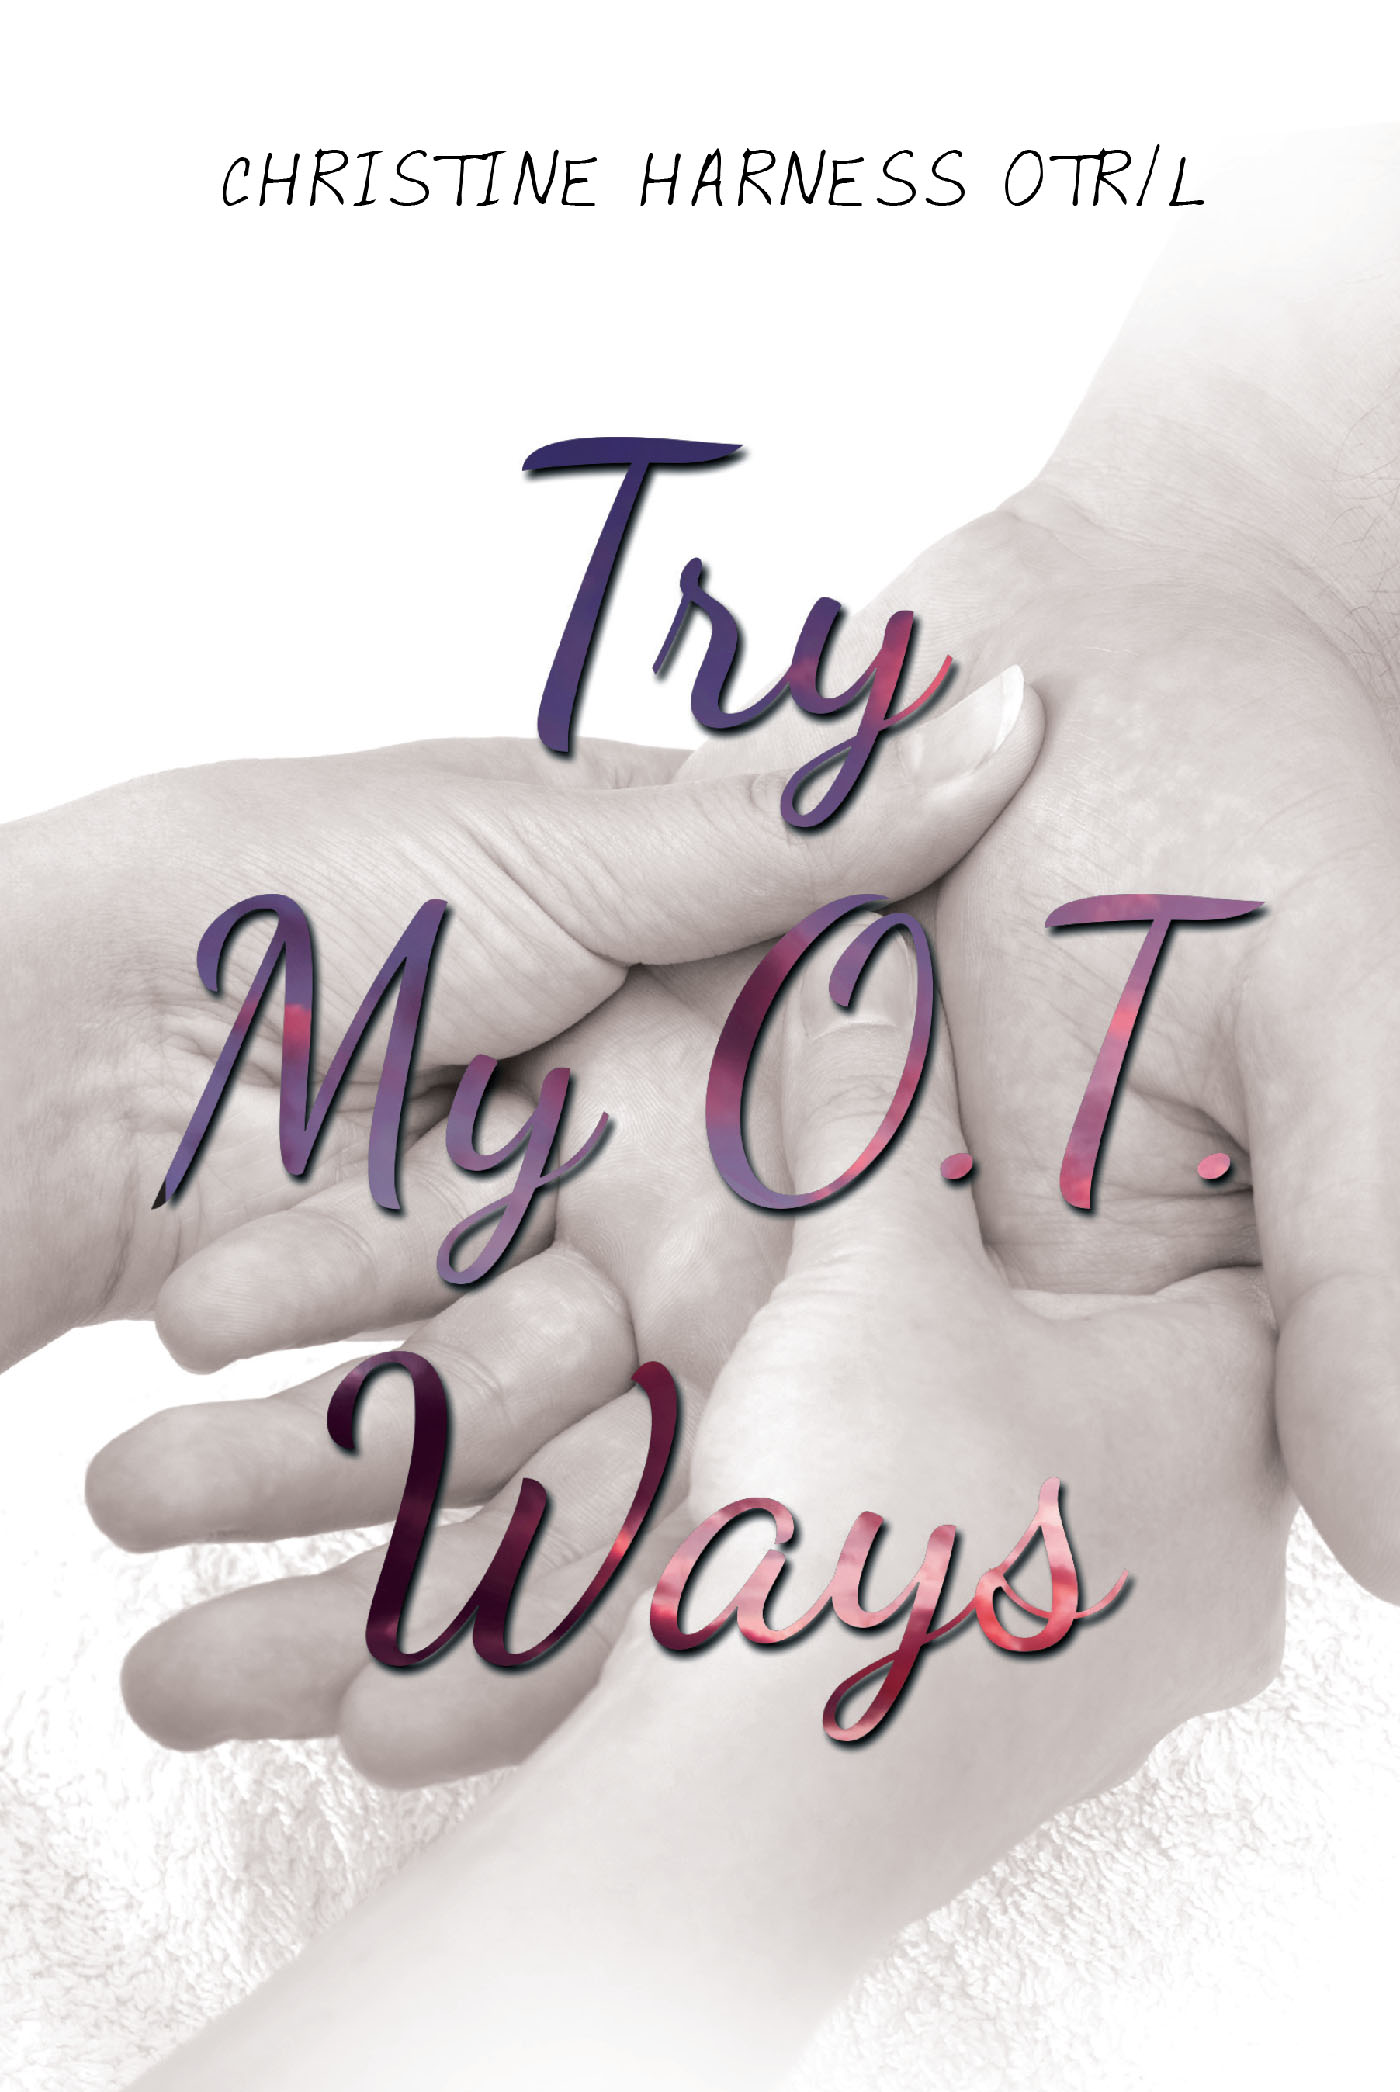 TRY MY O.T. WAYS Cover Image